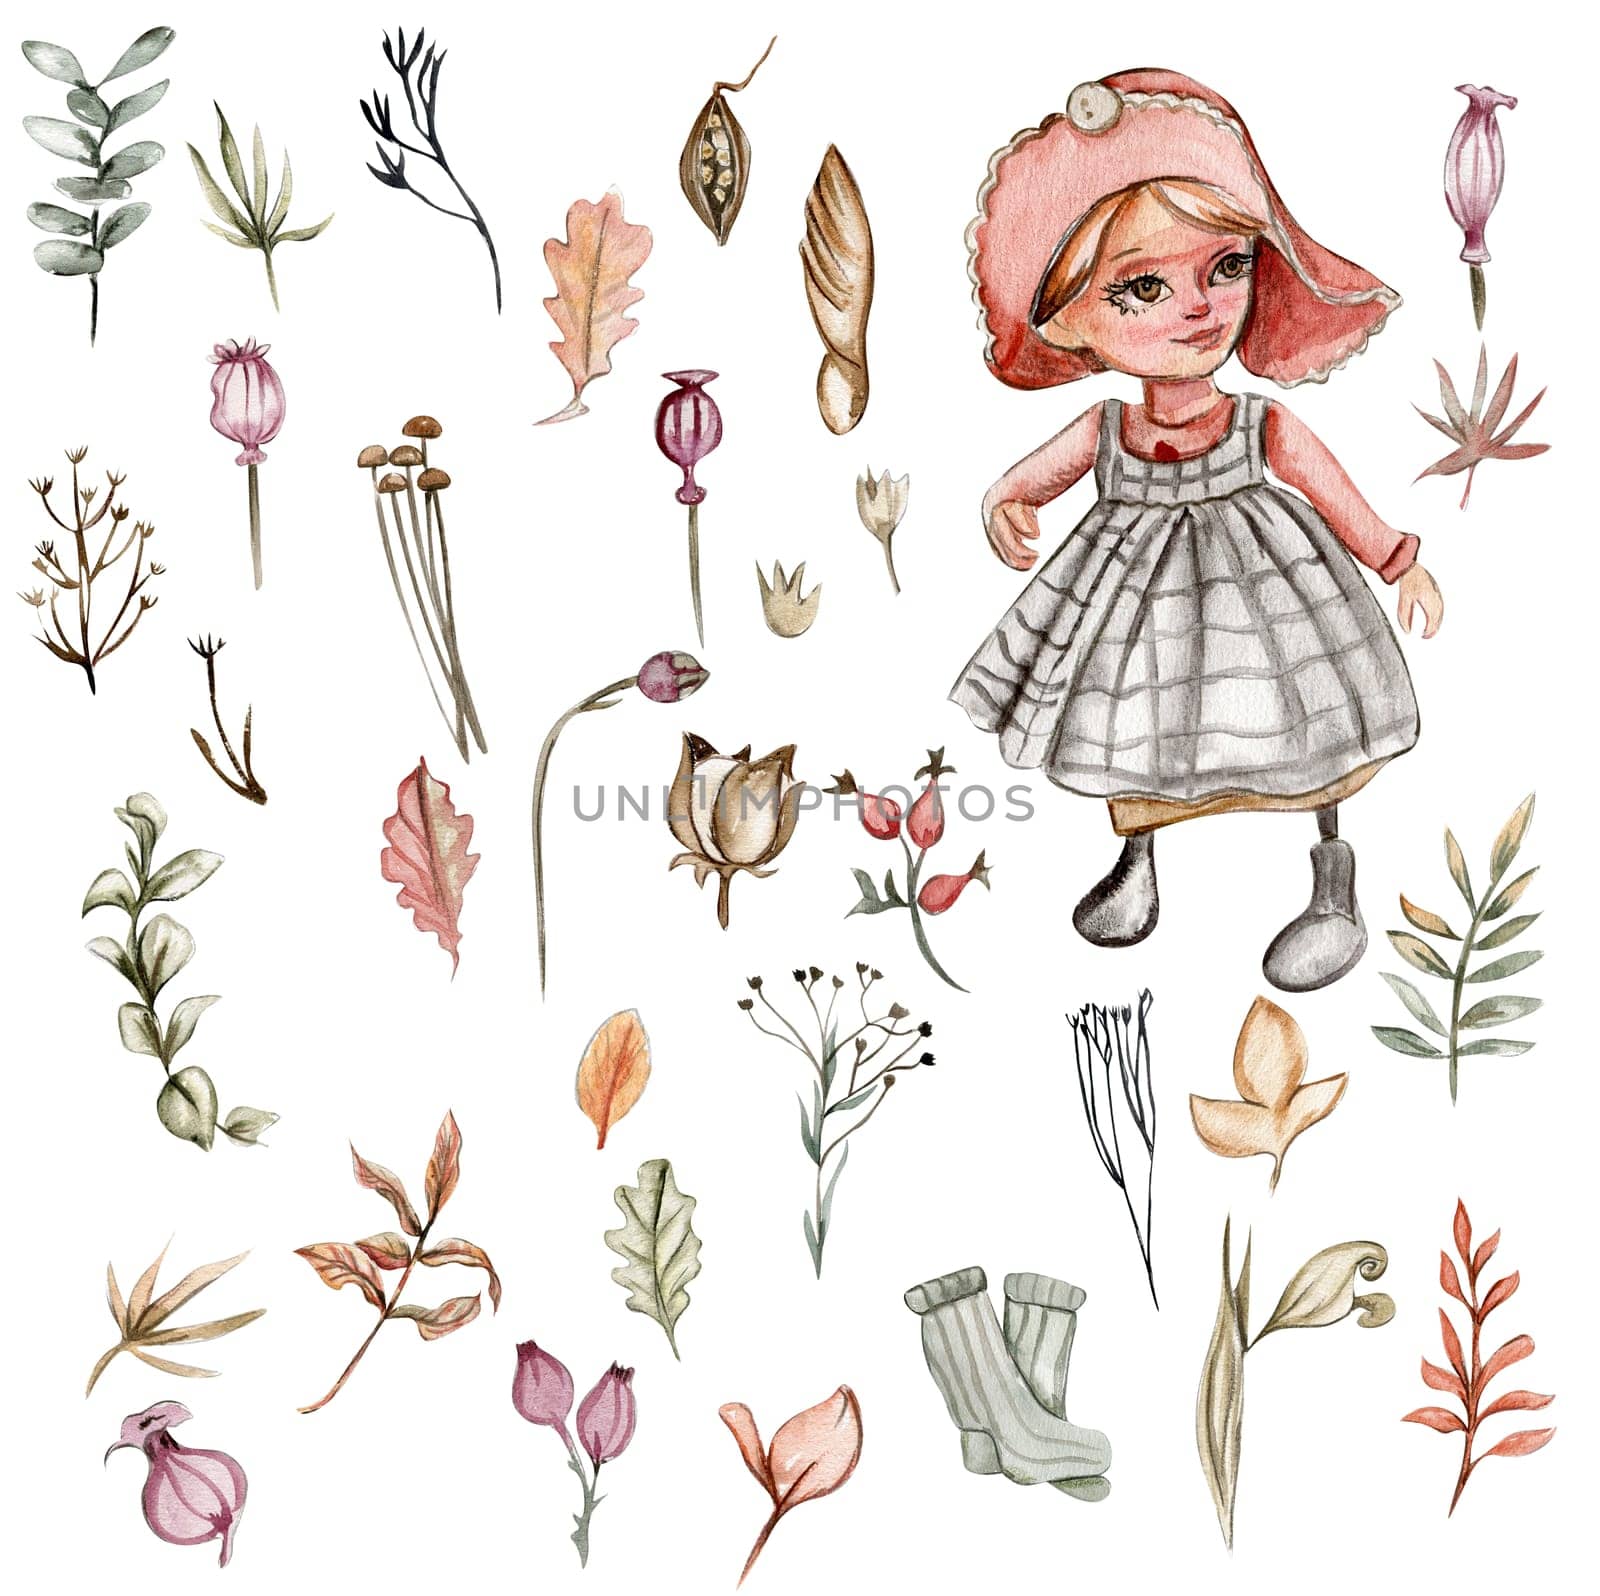 Autumn set of gnom girl and fall leaves. Hand drawn illustration of autumn. Perfect for scrapbooking, kids design, wedding invitation, posters, greetings cards, party decoration.